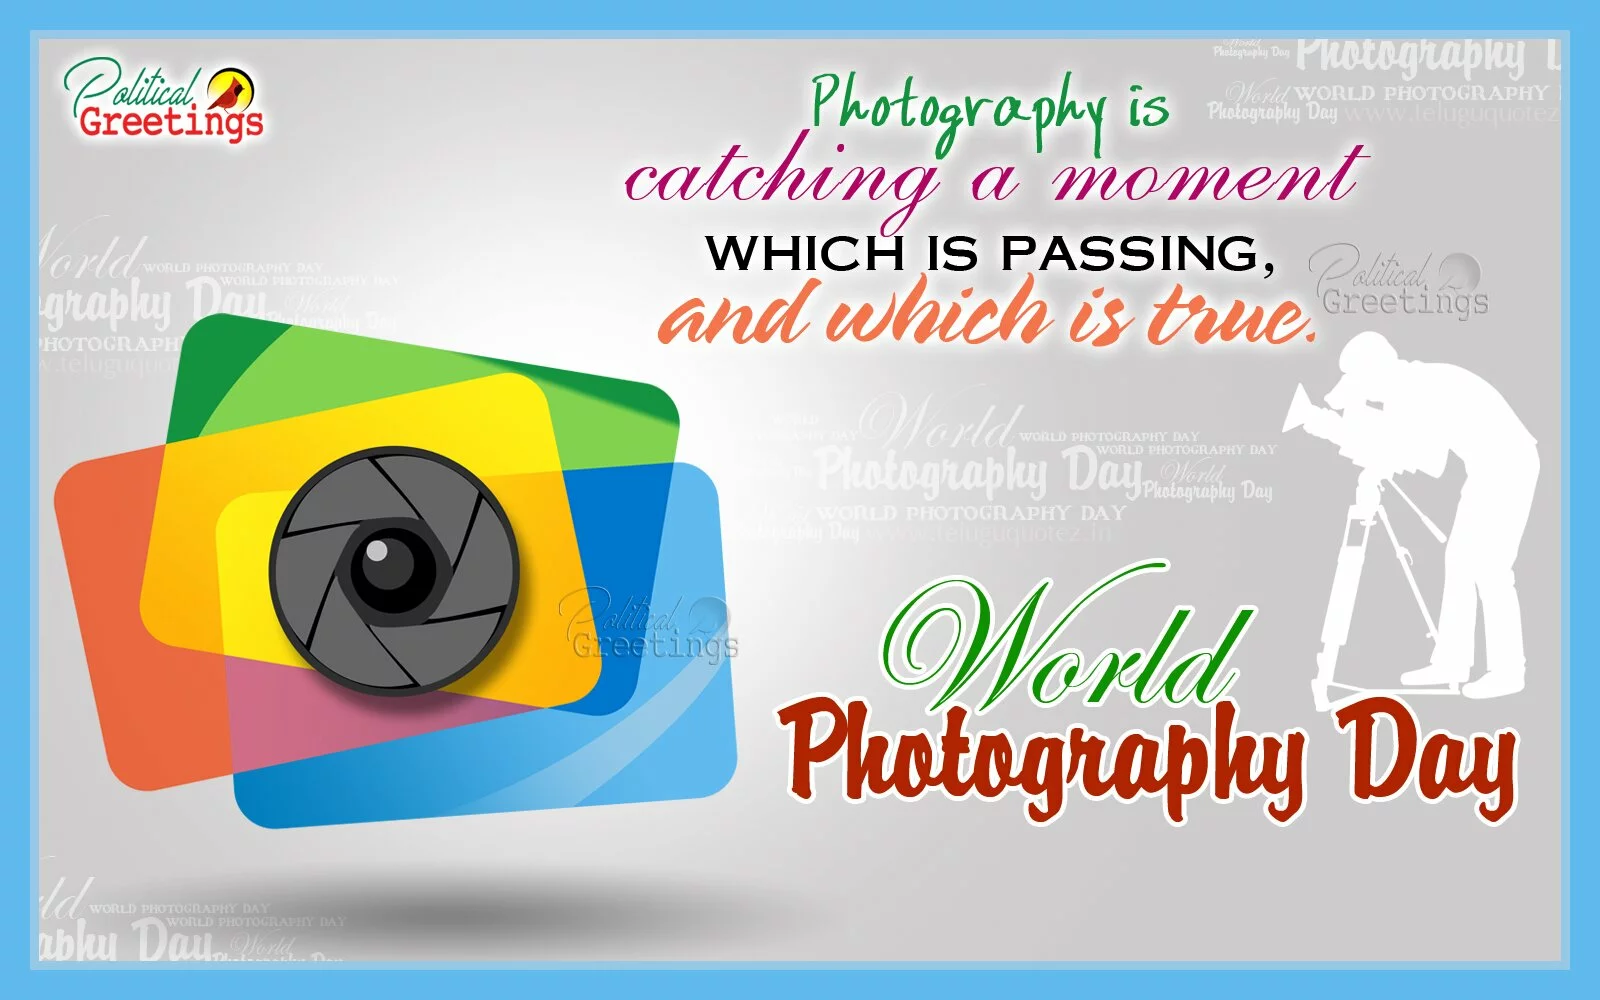 World's Photography Day English Greetings with Hd Wallpapers Free download